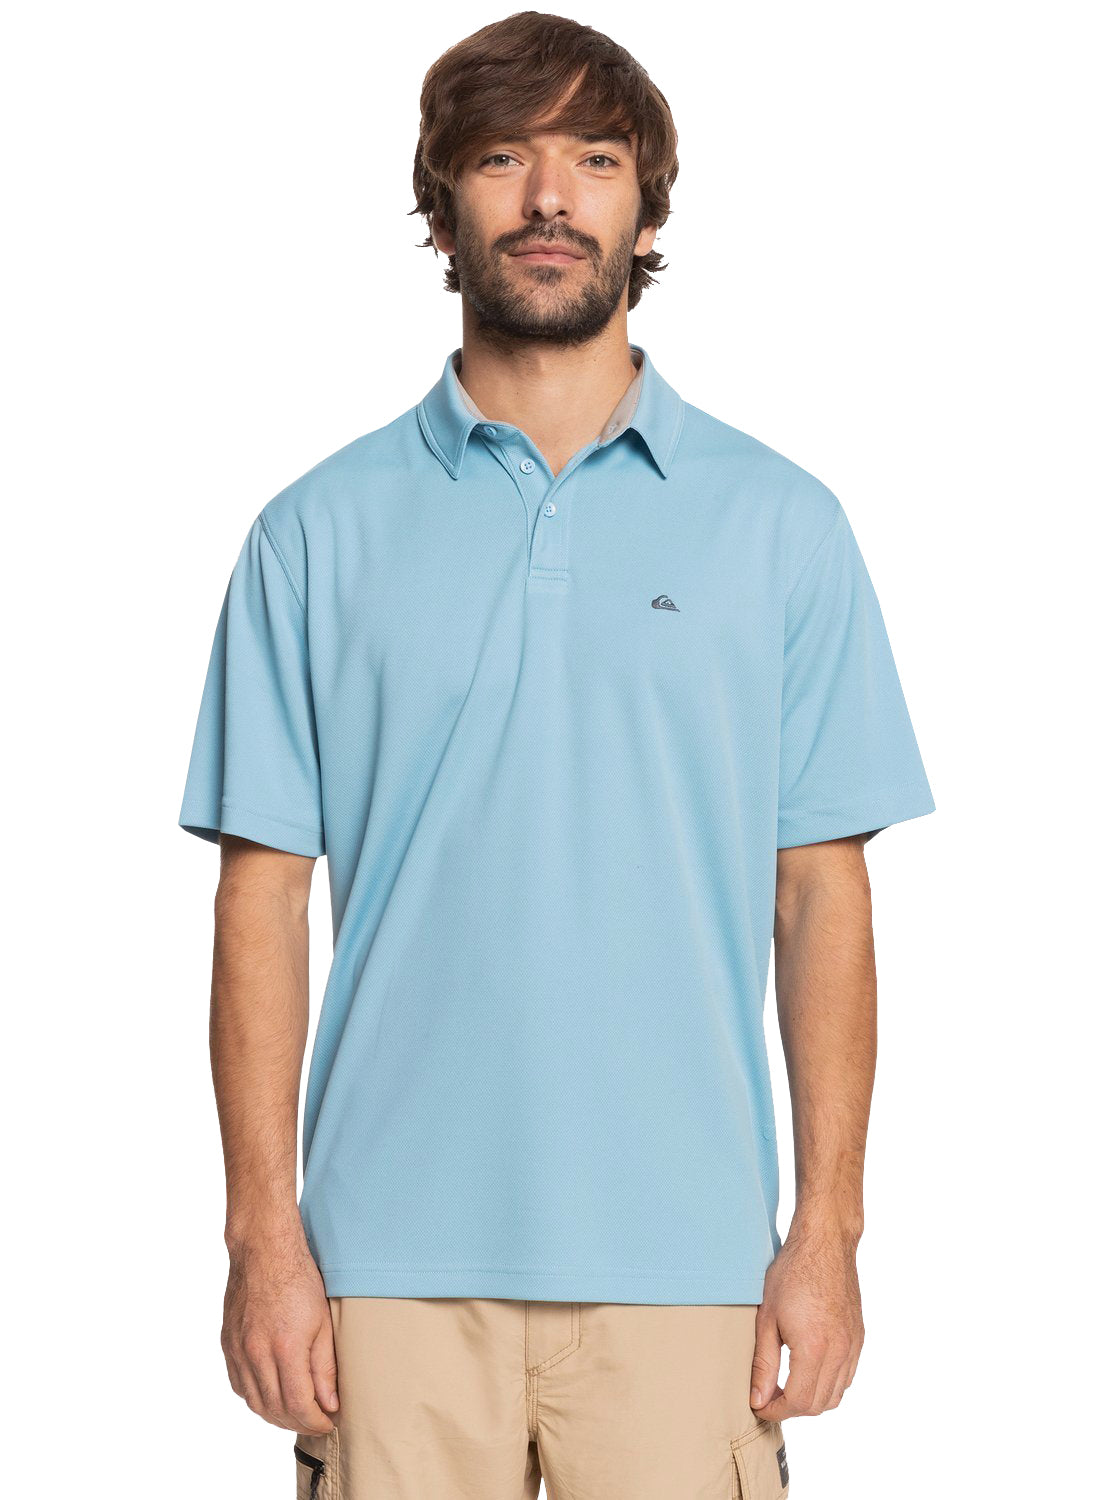 Quiksilver Waterman Water 2 Polo BHC0 M